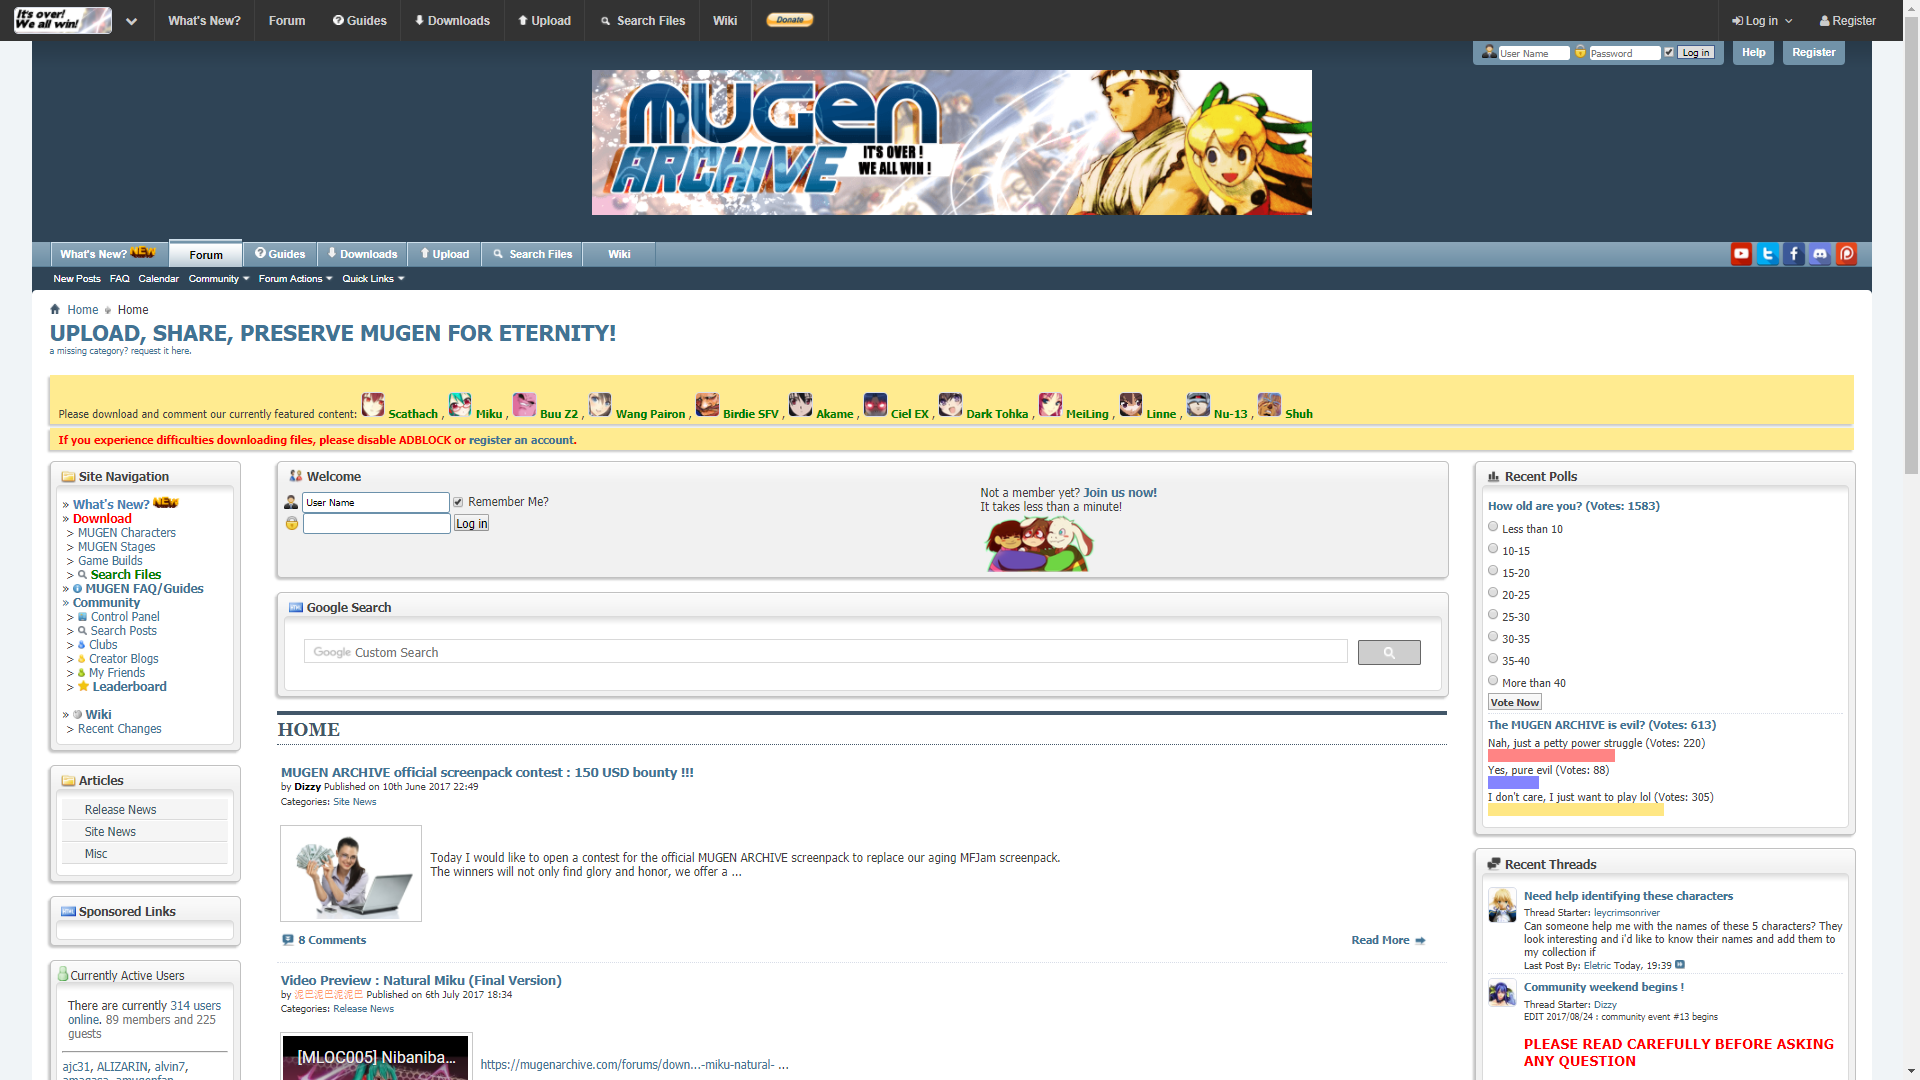 What was the last thing you downloaded on Mugen Archive? - Page 9